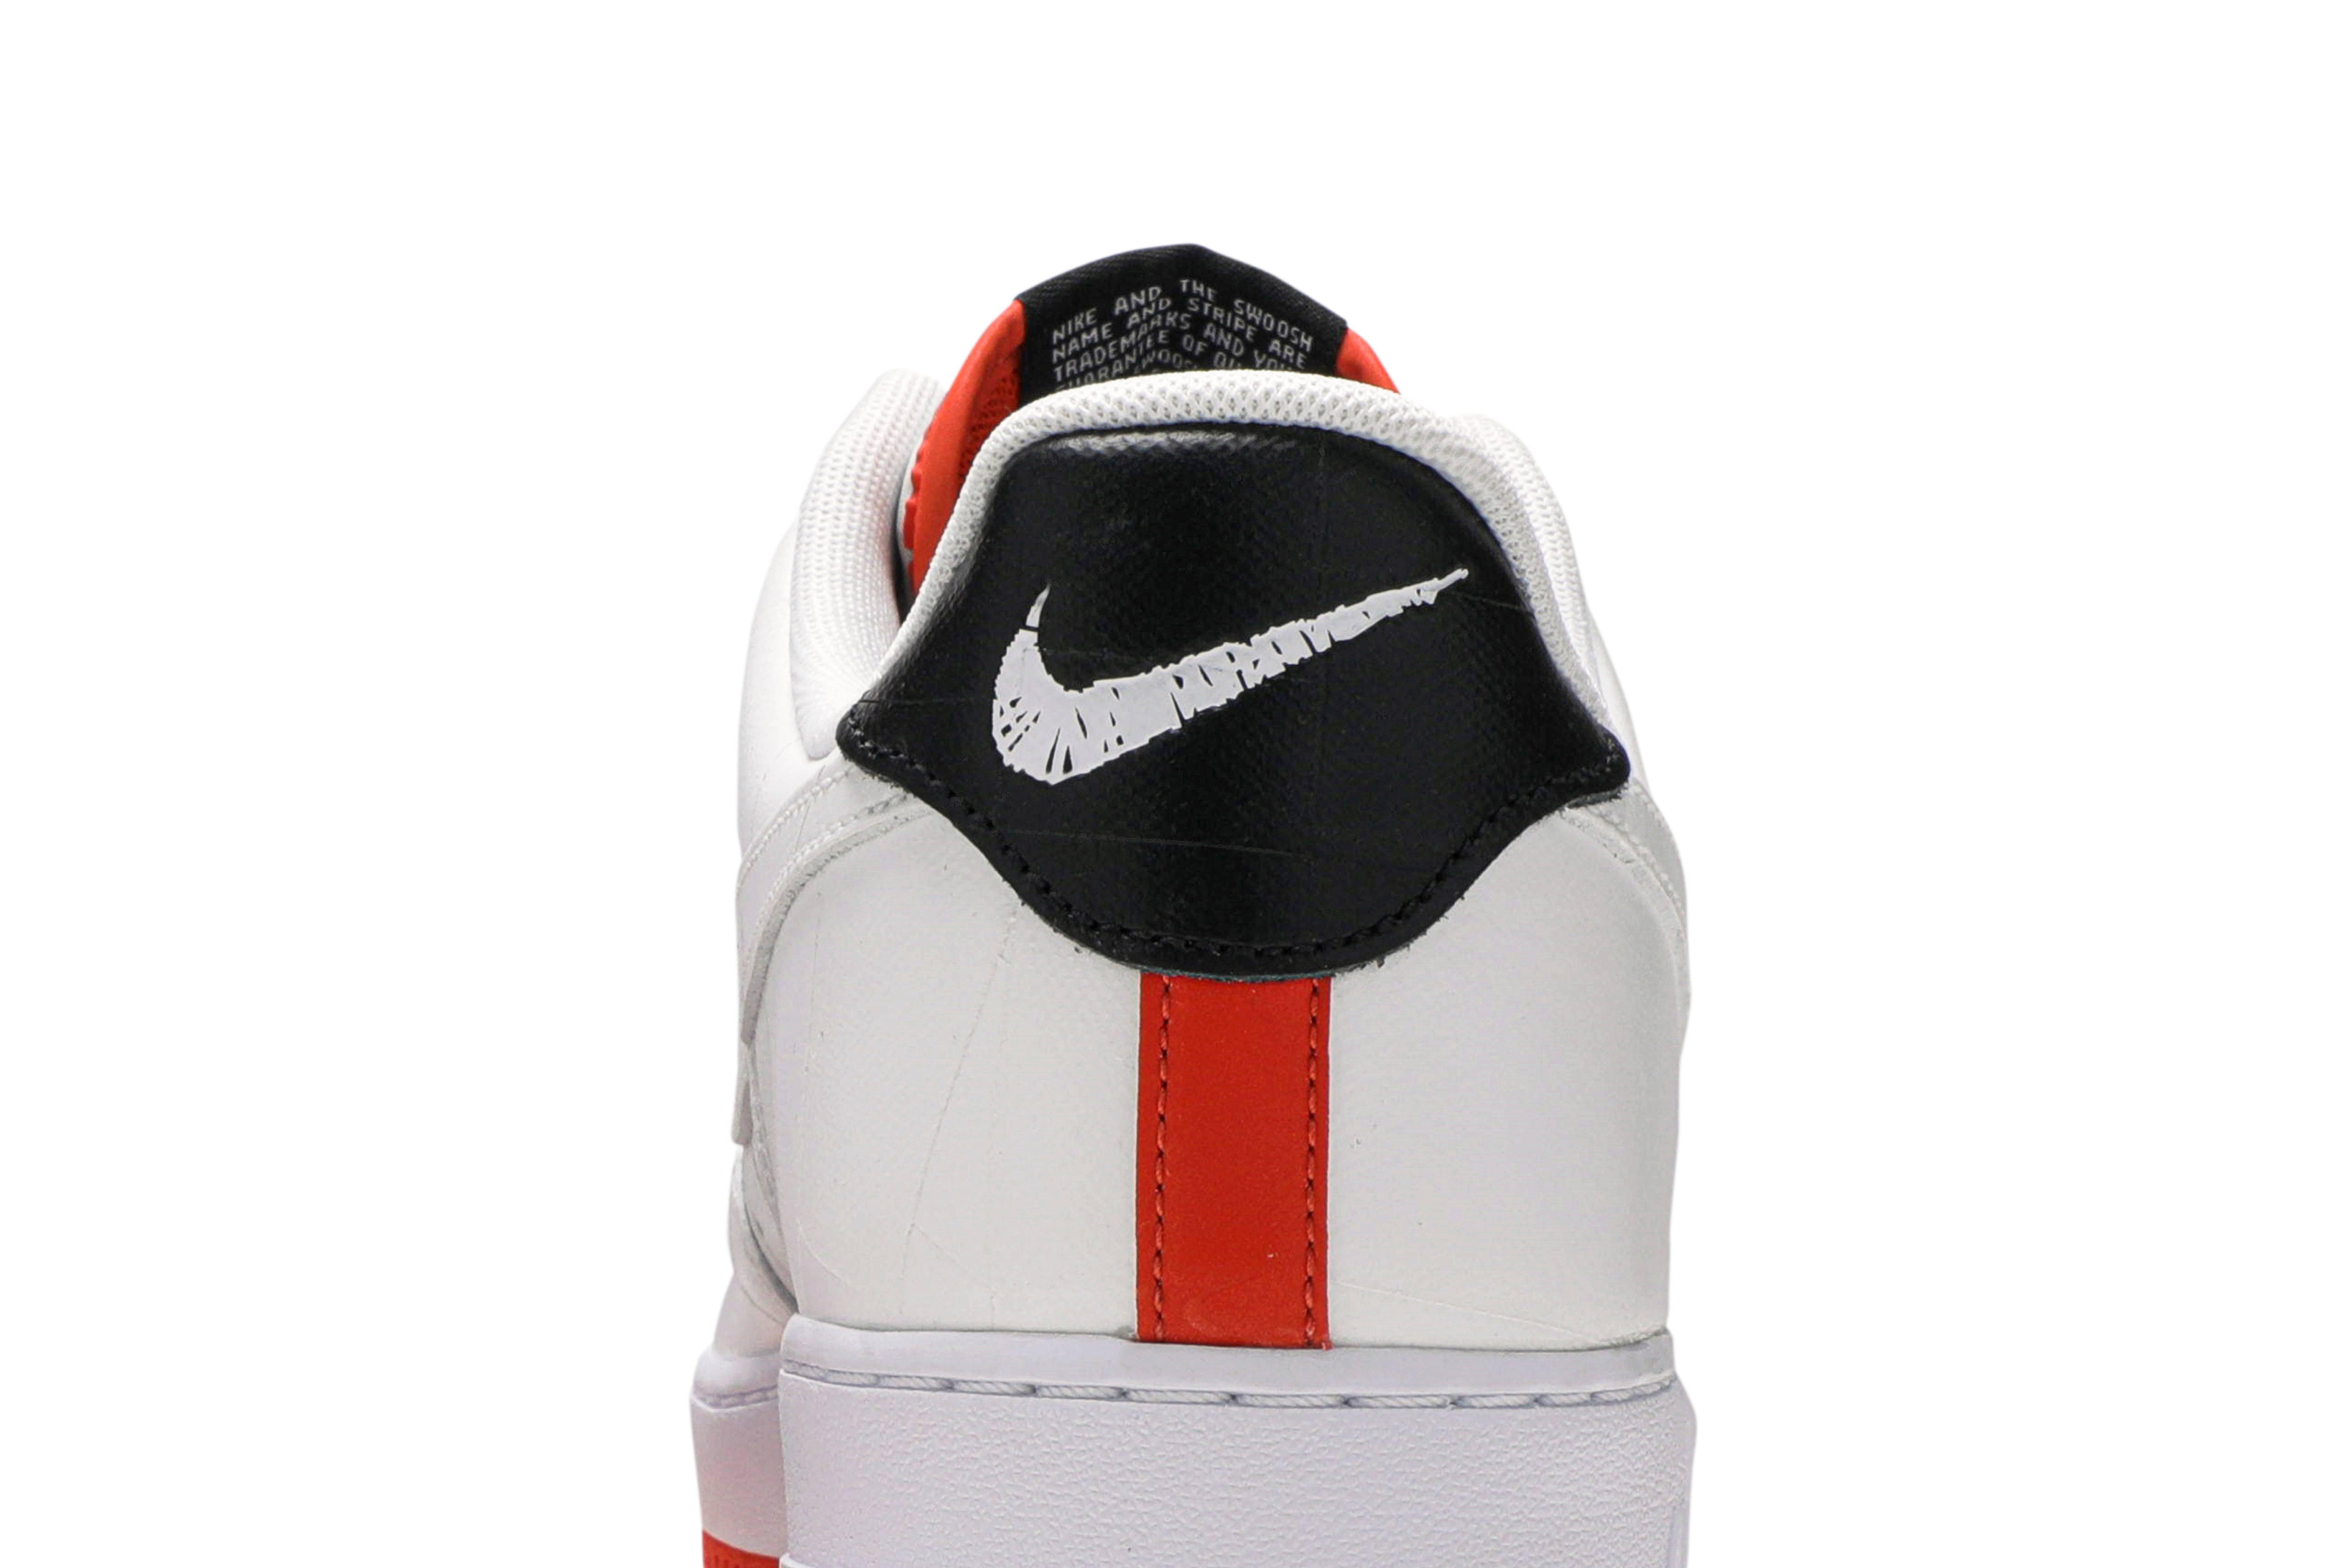 Nike Leather "air Force 1 '07 Lv8 ""ny Vs Ny""" in White/Black (White) for  Men - Save 59% - Lyst